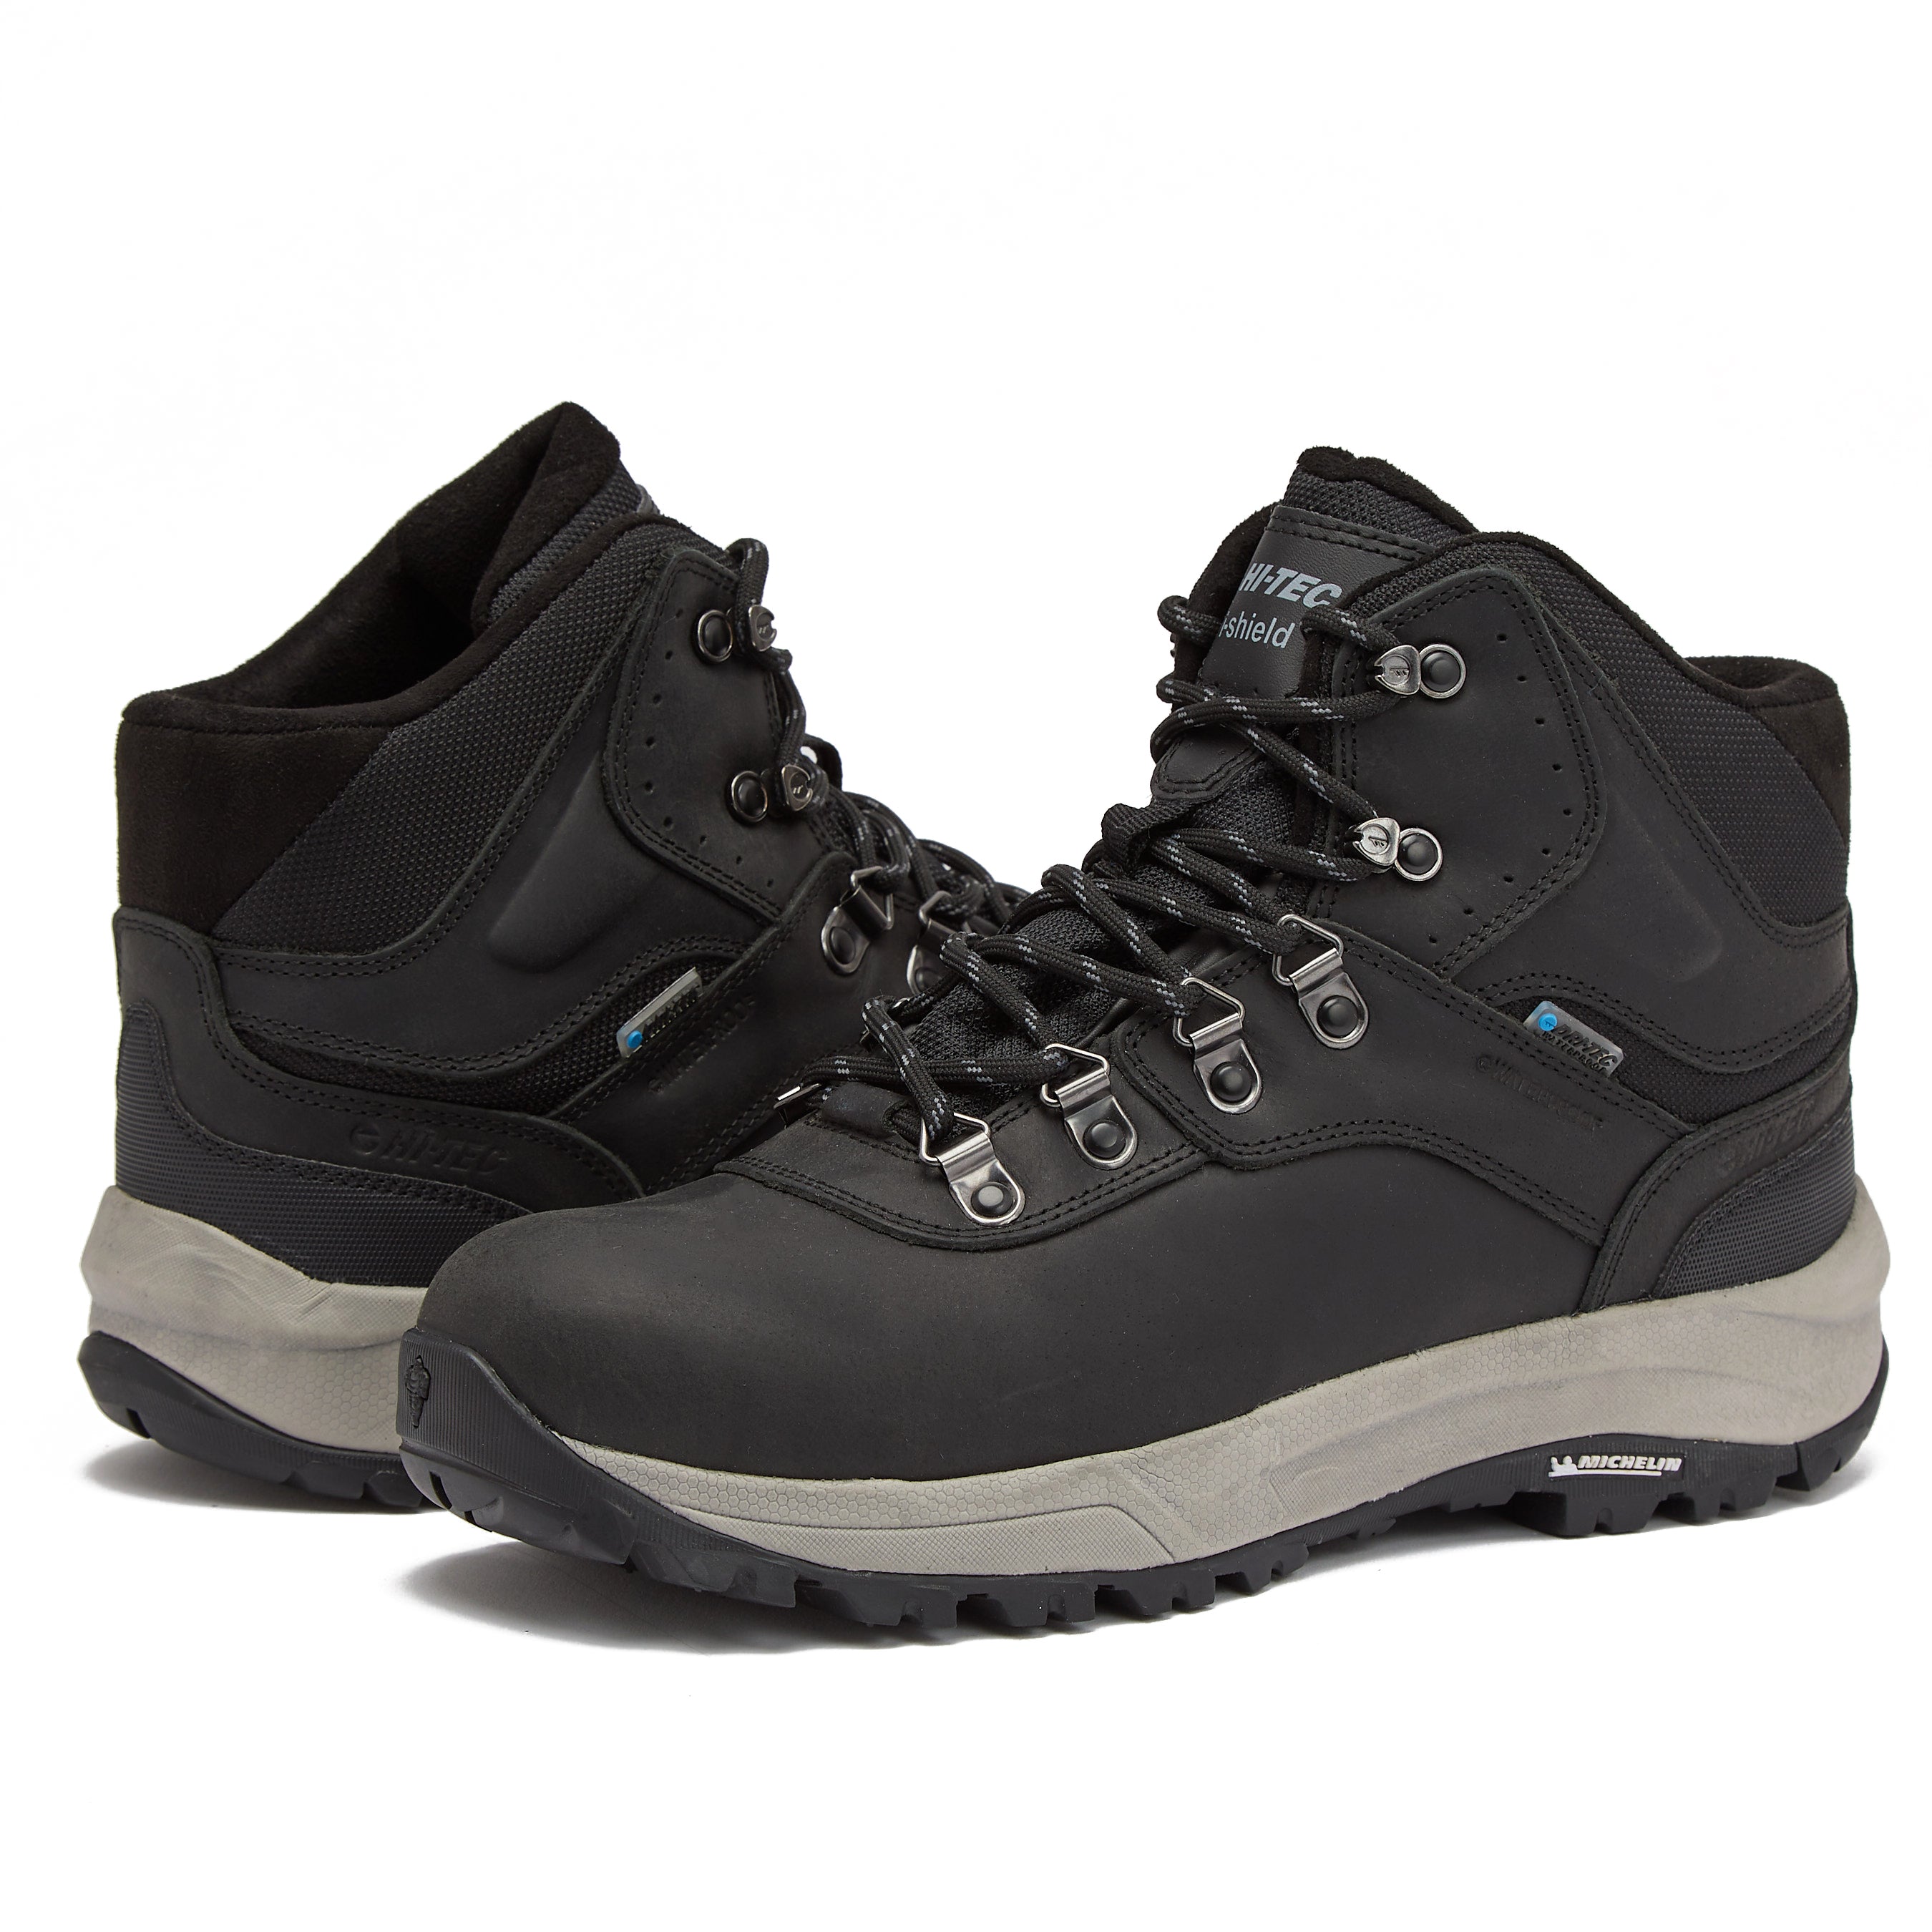 HI-TEC Altitude Waterproof Hiking Boots for Men | Leather Work Boots ...